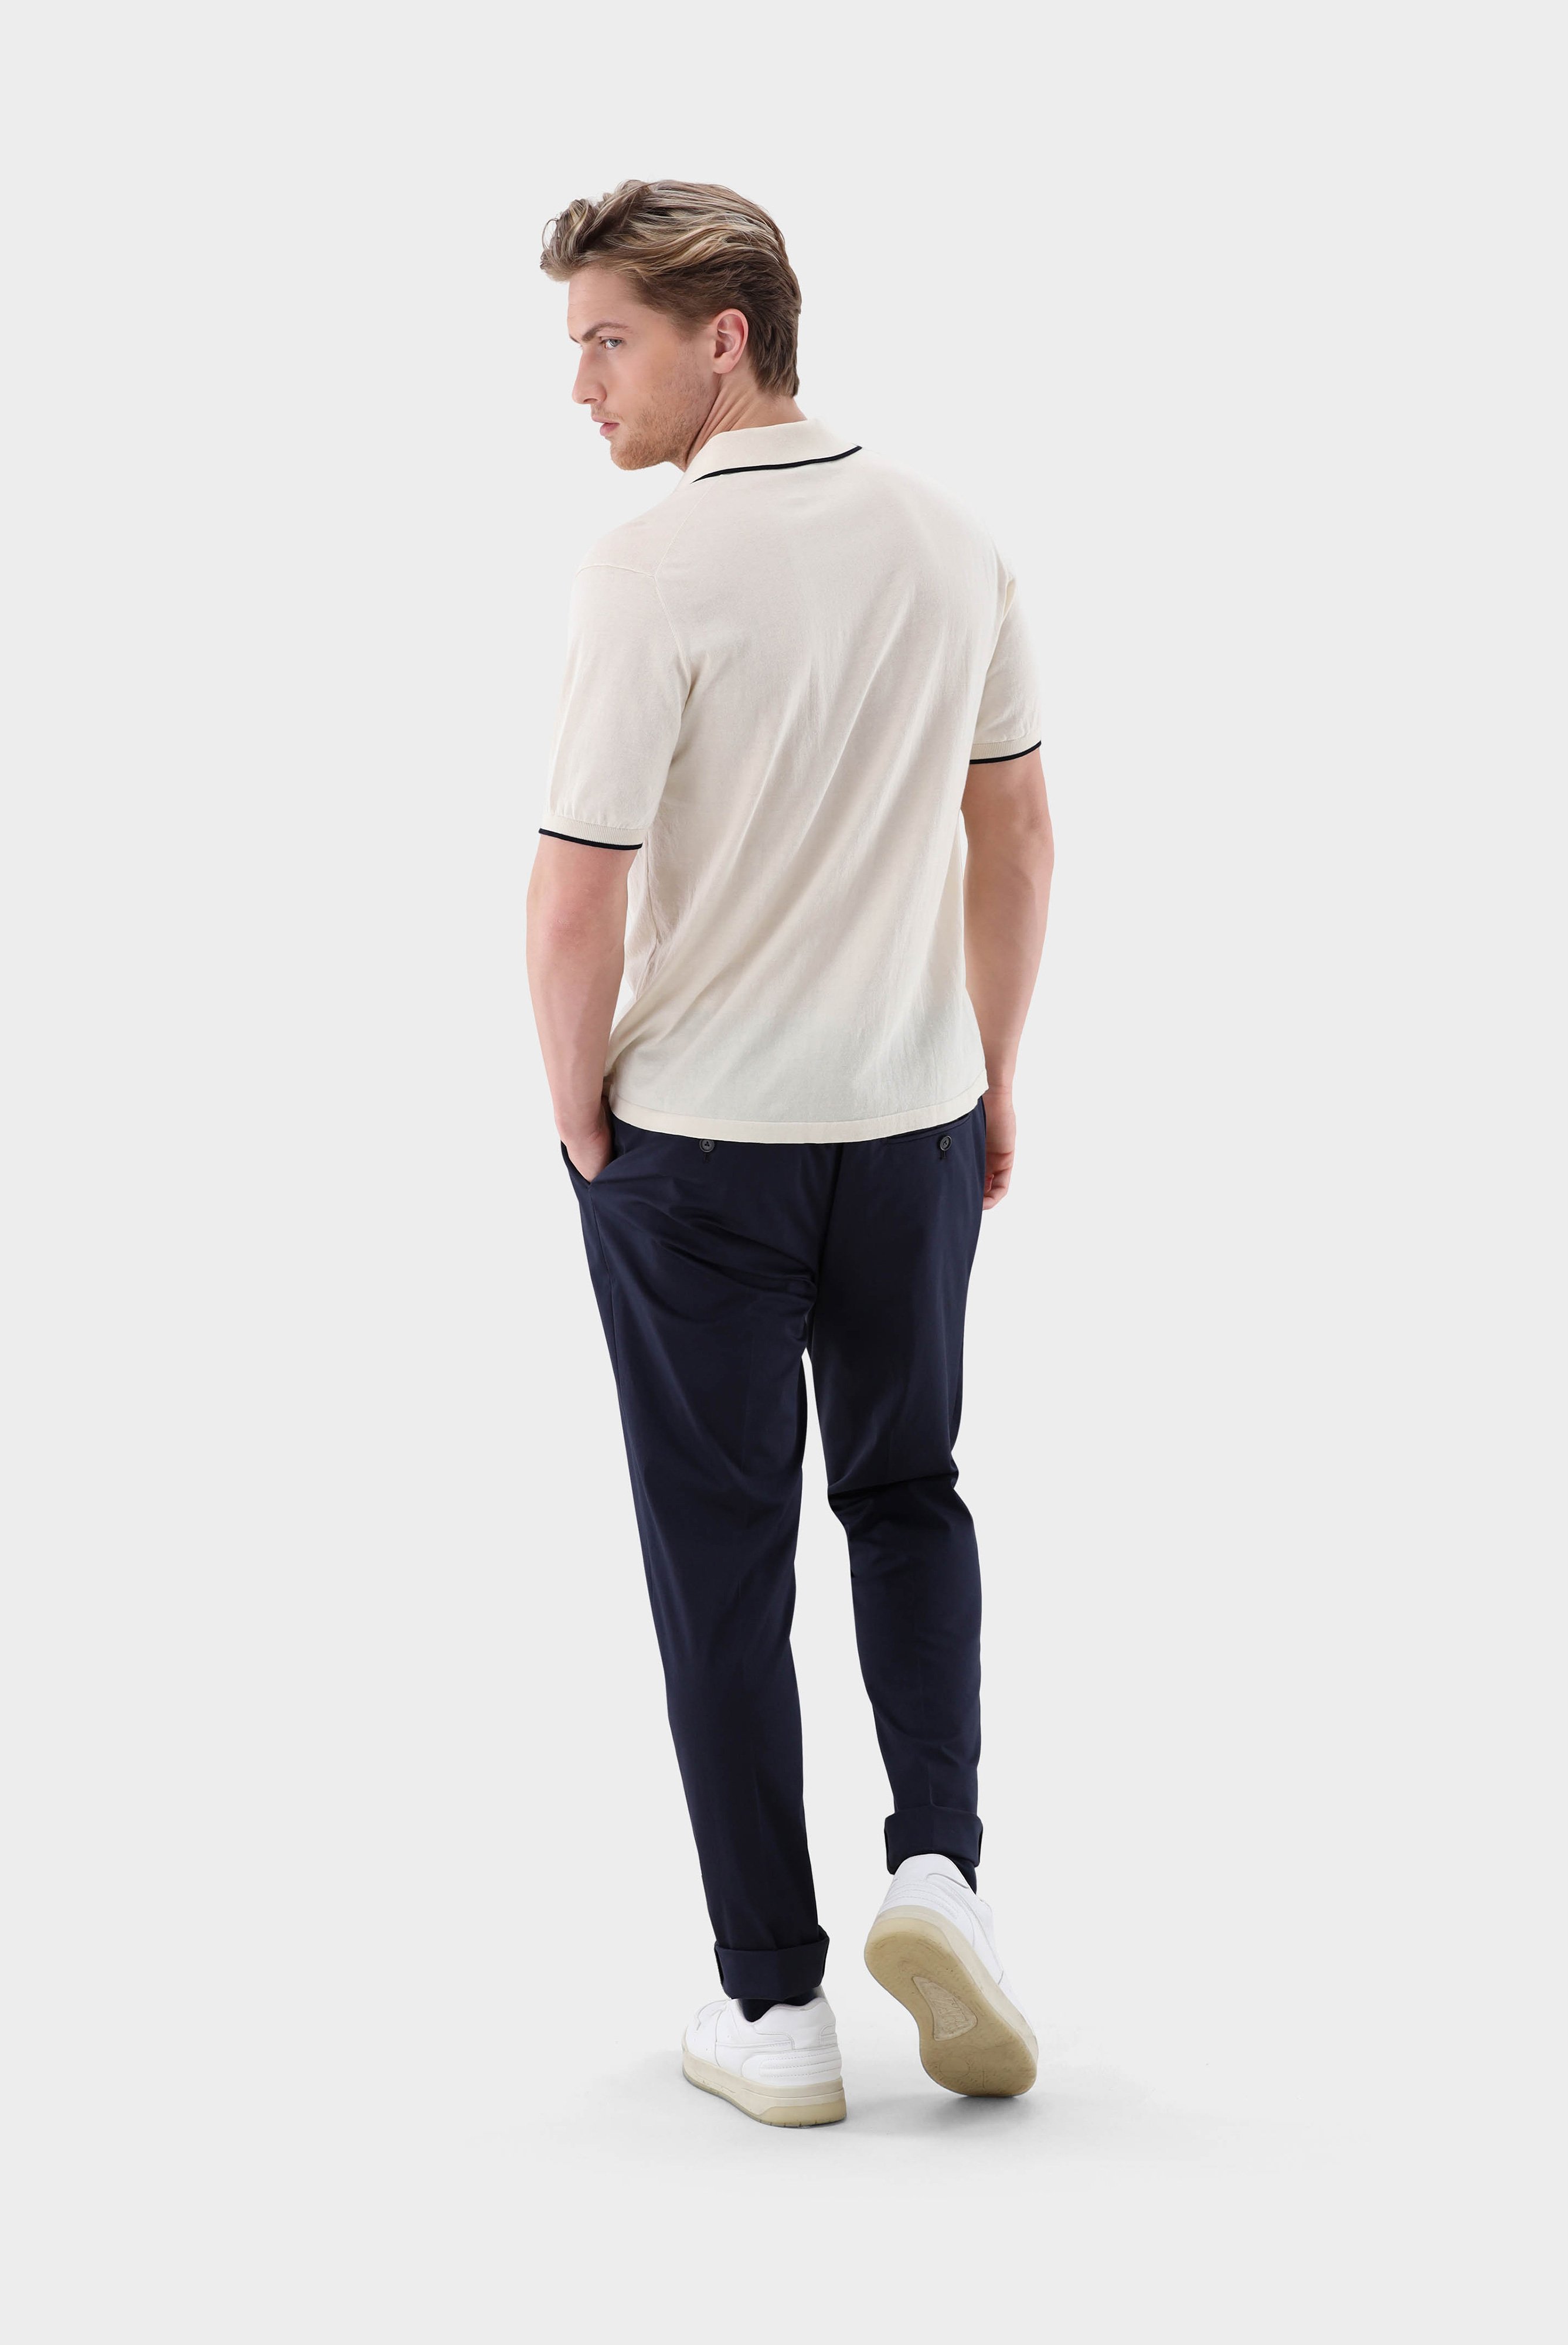 Poloshirts+Zip Knit-Polo in Air Cotton+82.8647.S7.S00174.120.M